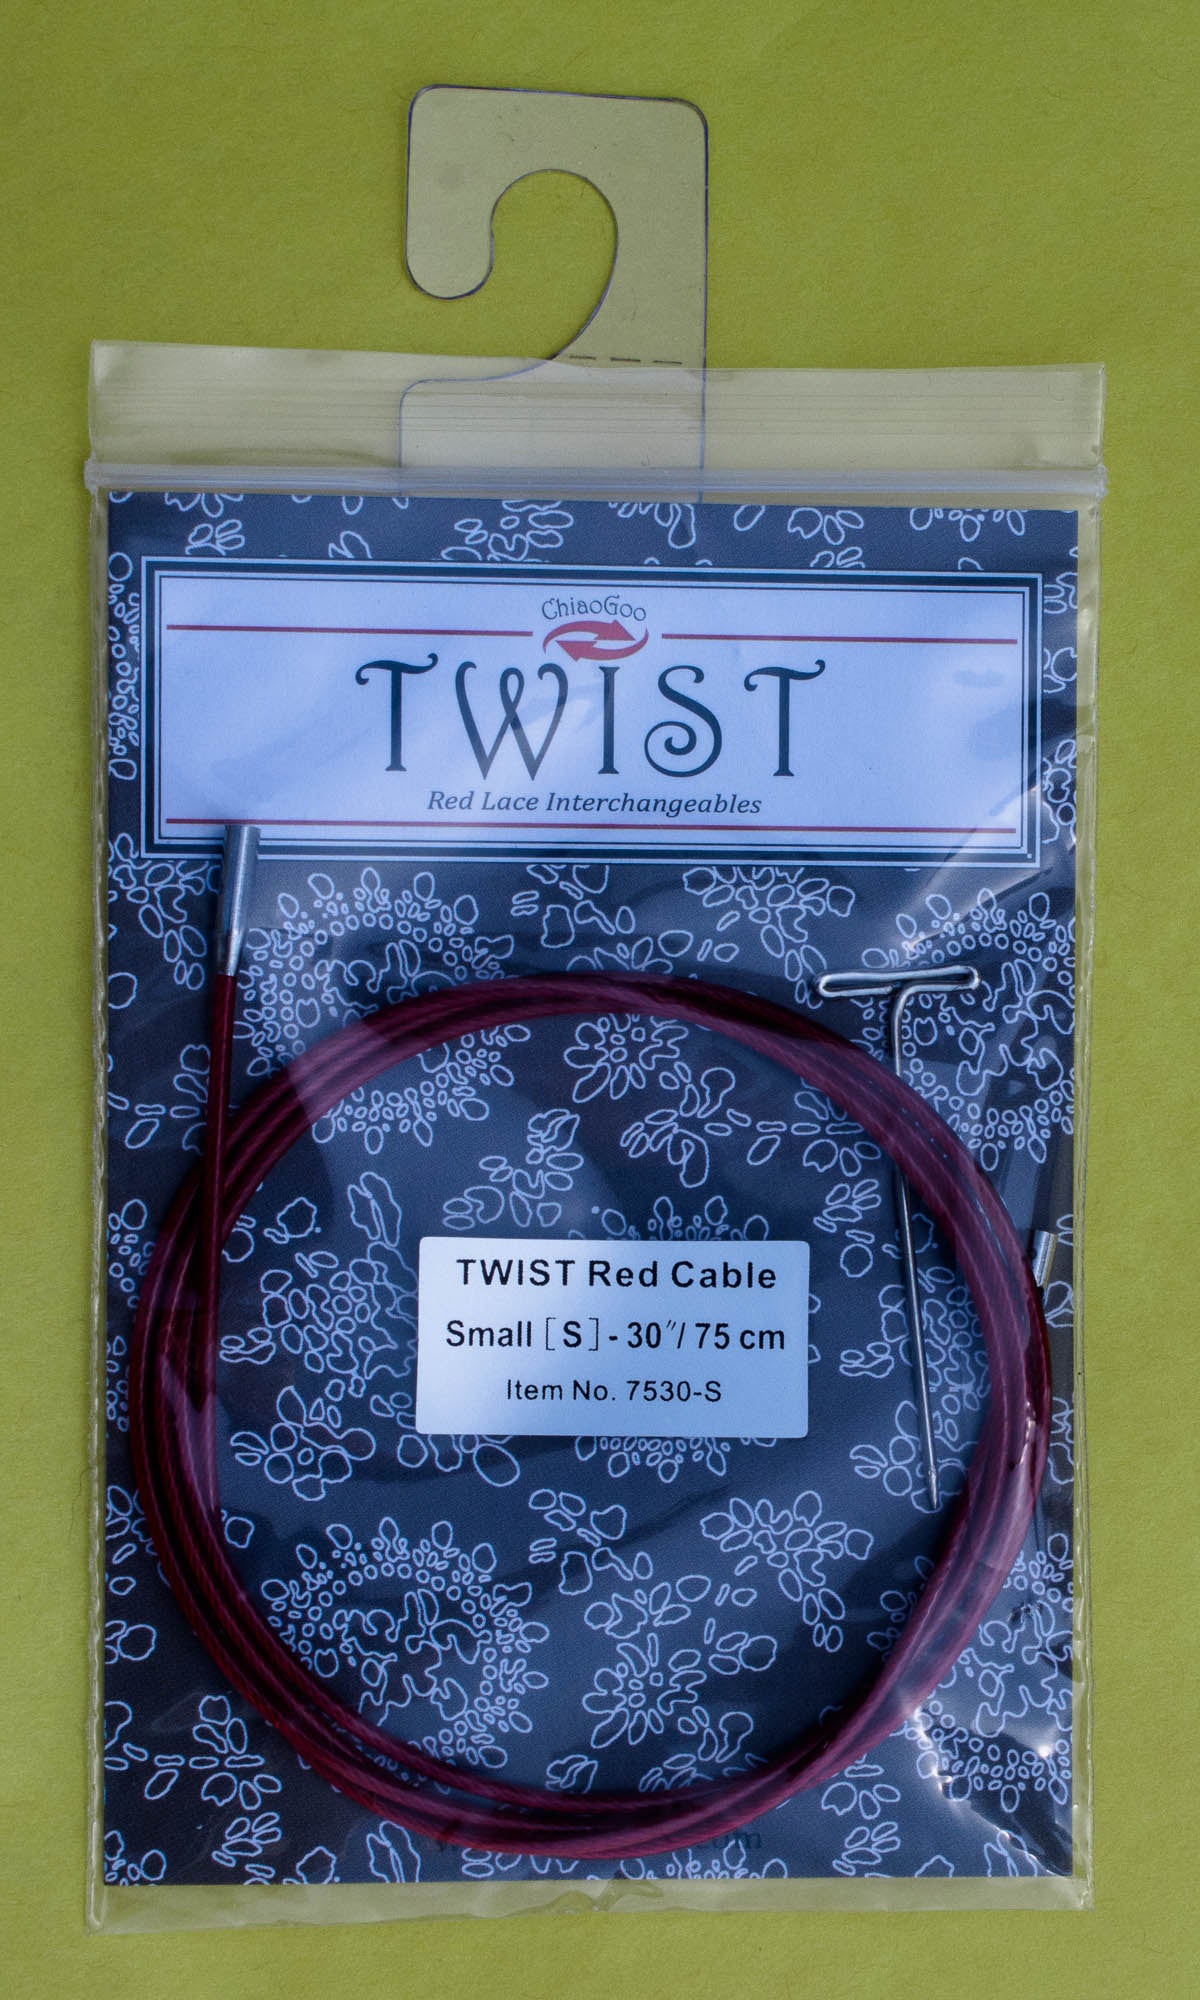 ChiaoGoo TWIST - [S] Small Interchangeable Red Cables - For US-2 (2.75 mm) to US-8 (5 mm) Tips